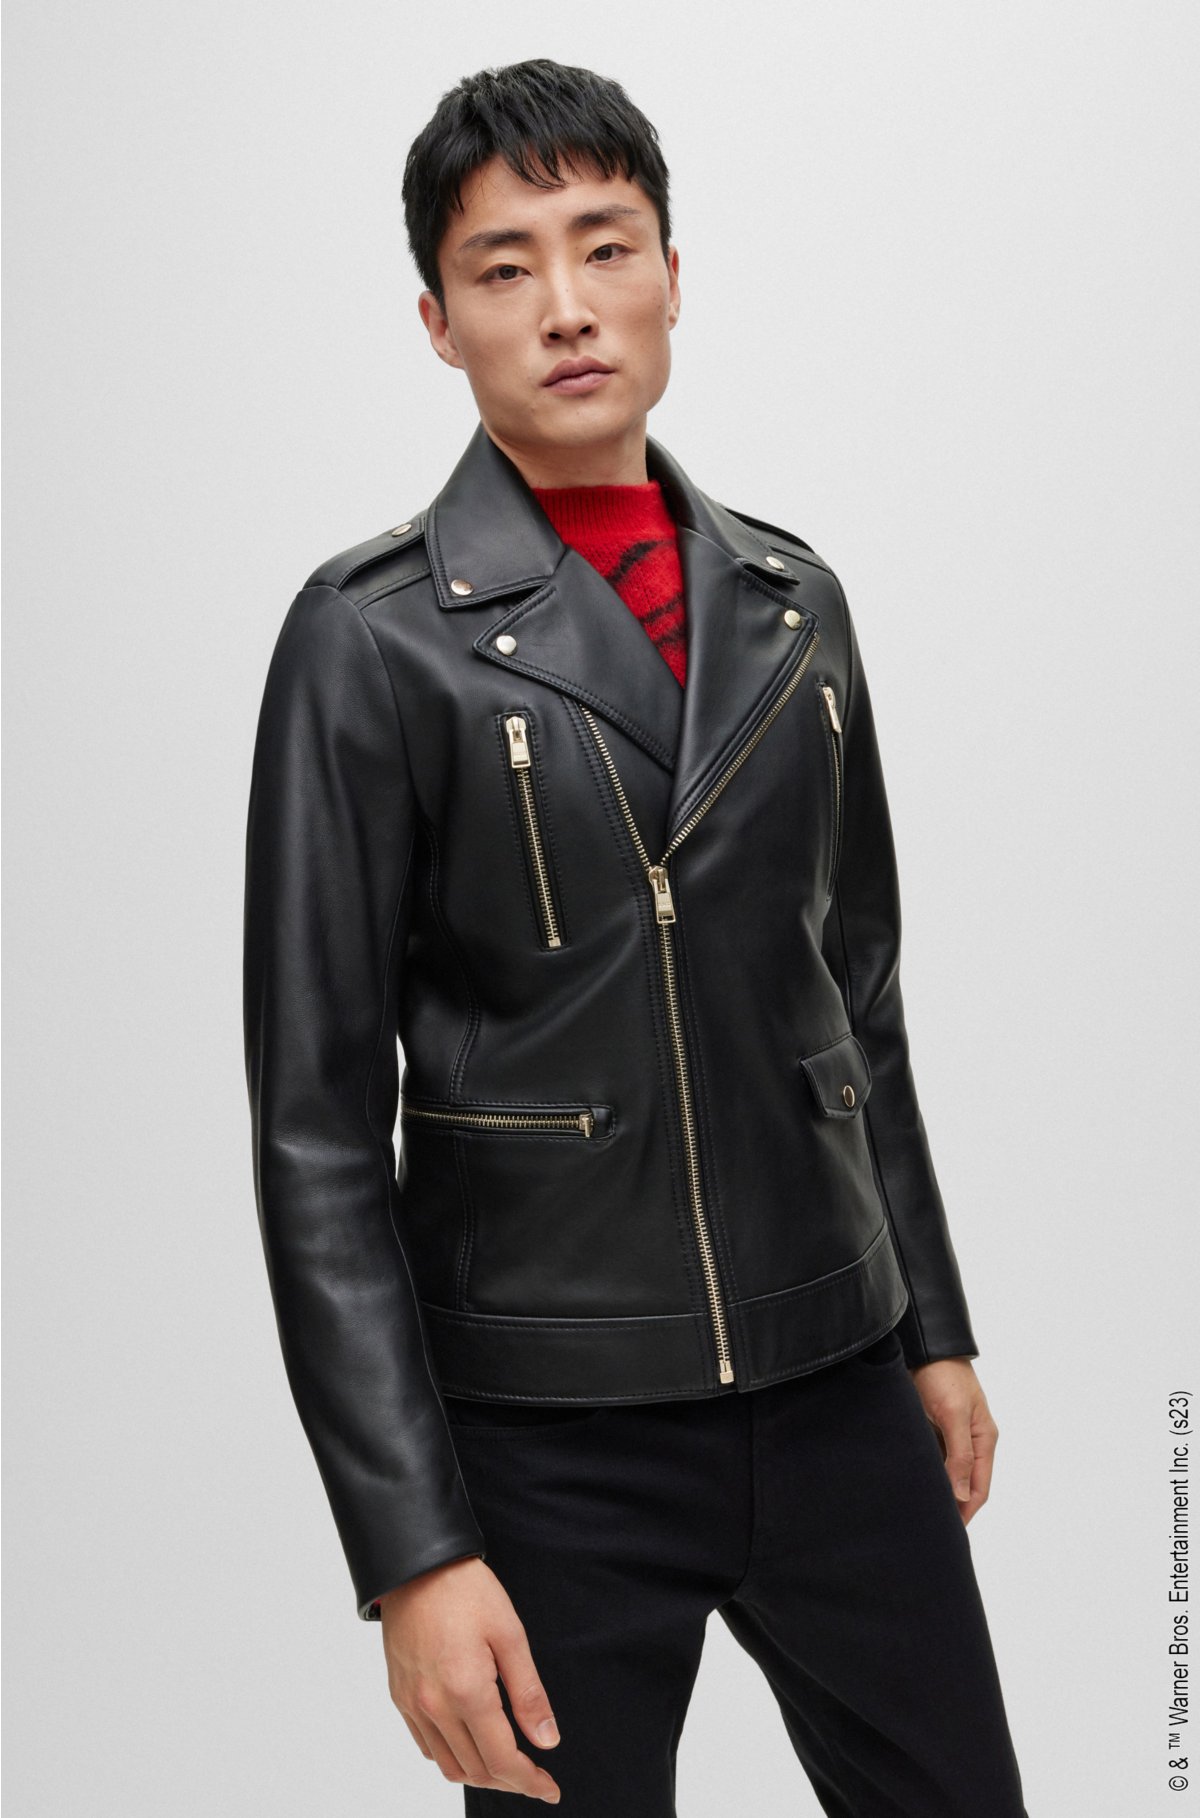 BOSS - Looney Tunes x BOSS Asymmetric leather jacket with lining